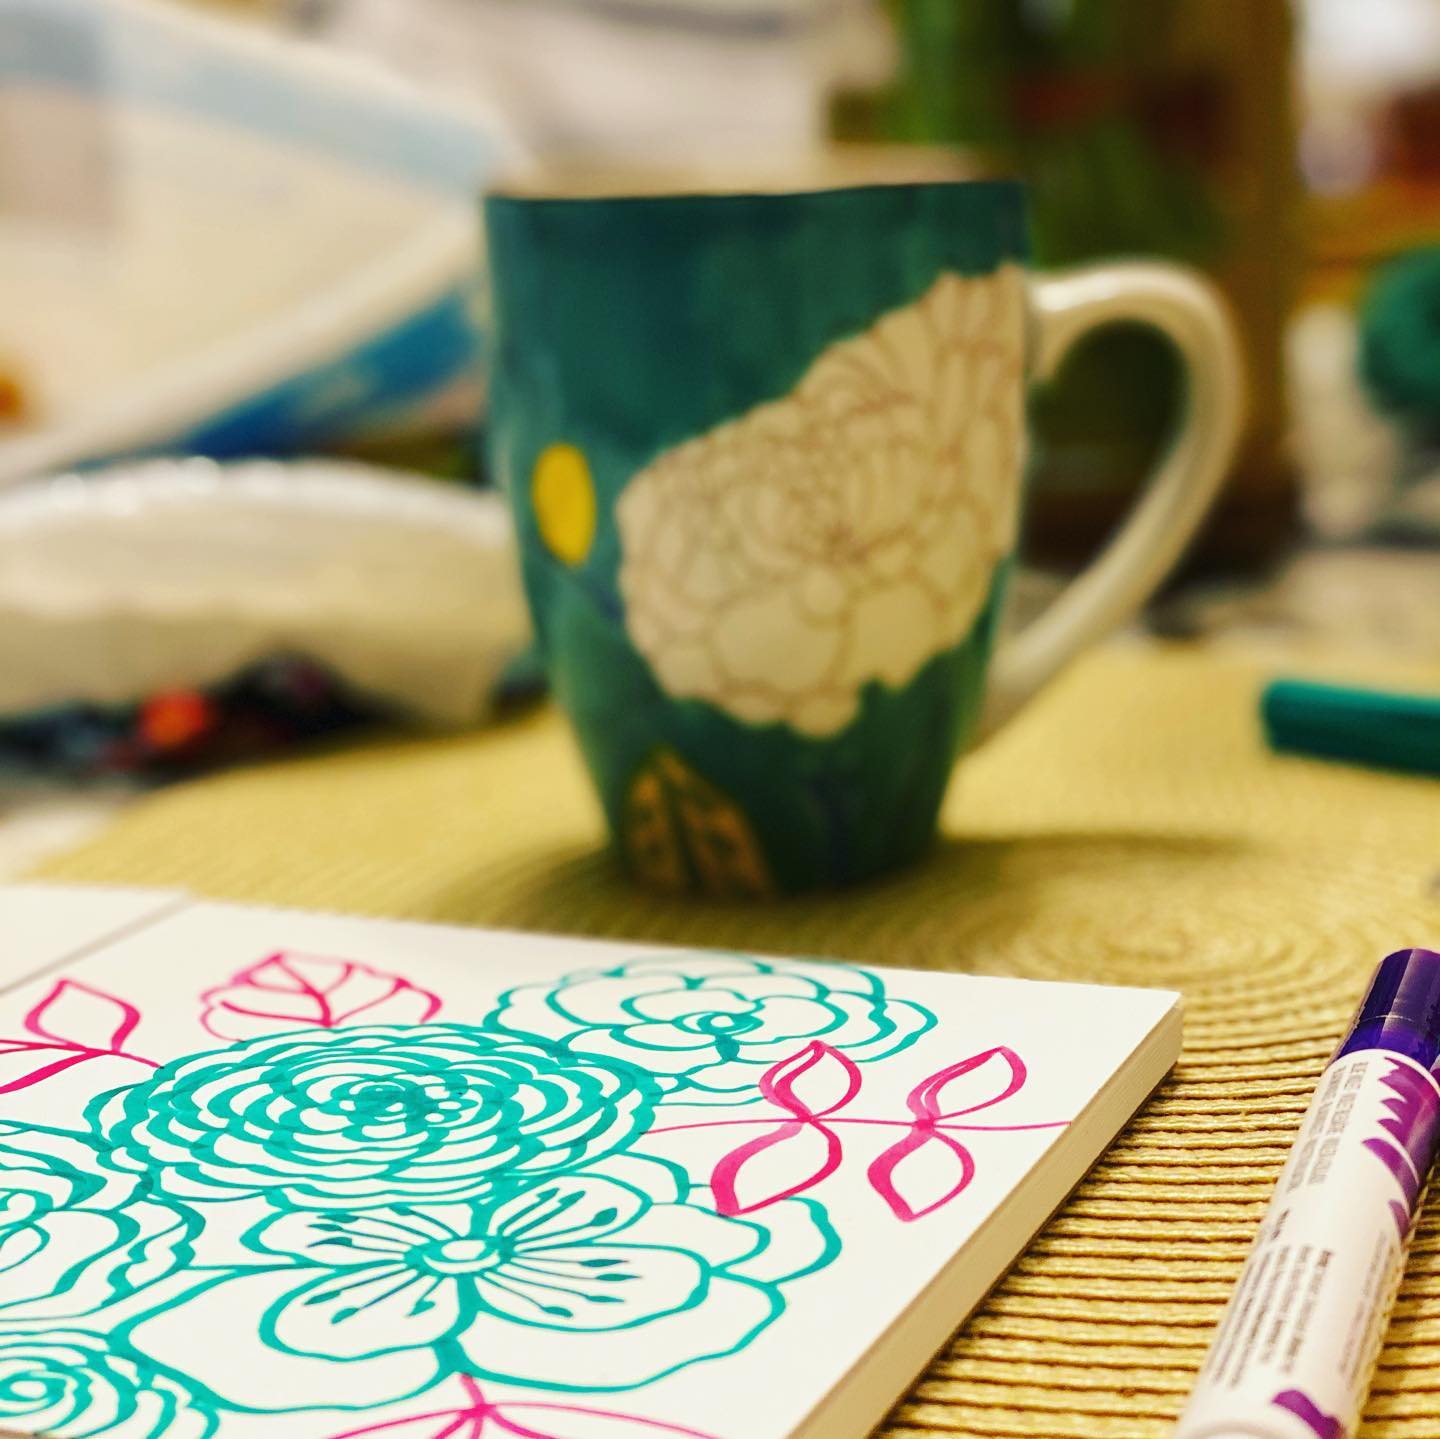 I often end my day with a hot cup of chamomile tea and a few doodles on the side.

How about pink leaves and some green flowers?